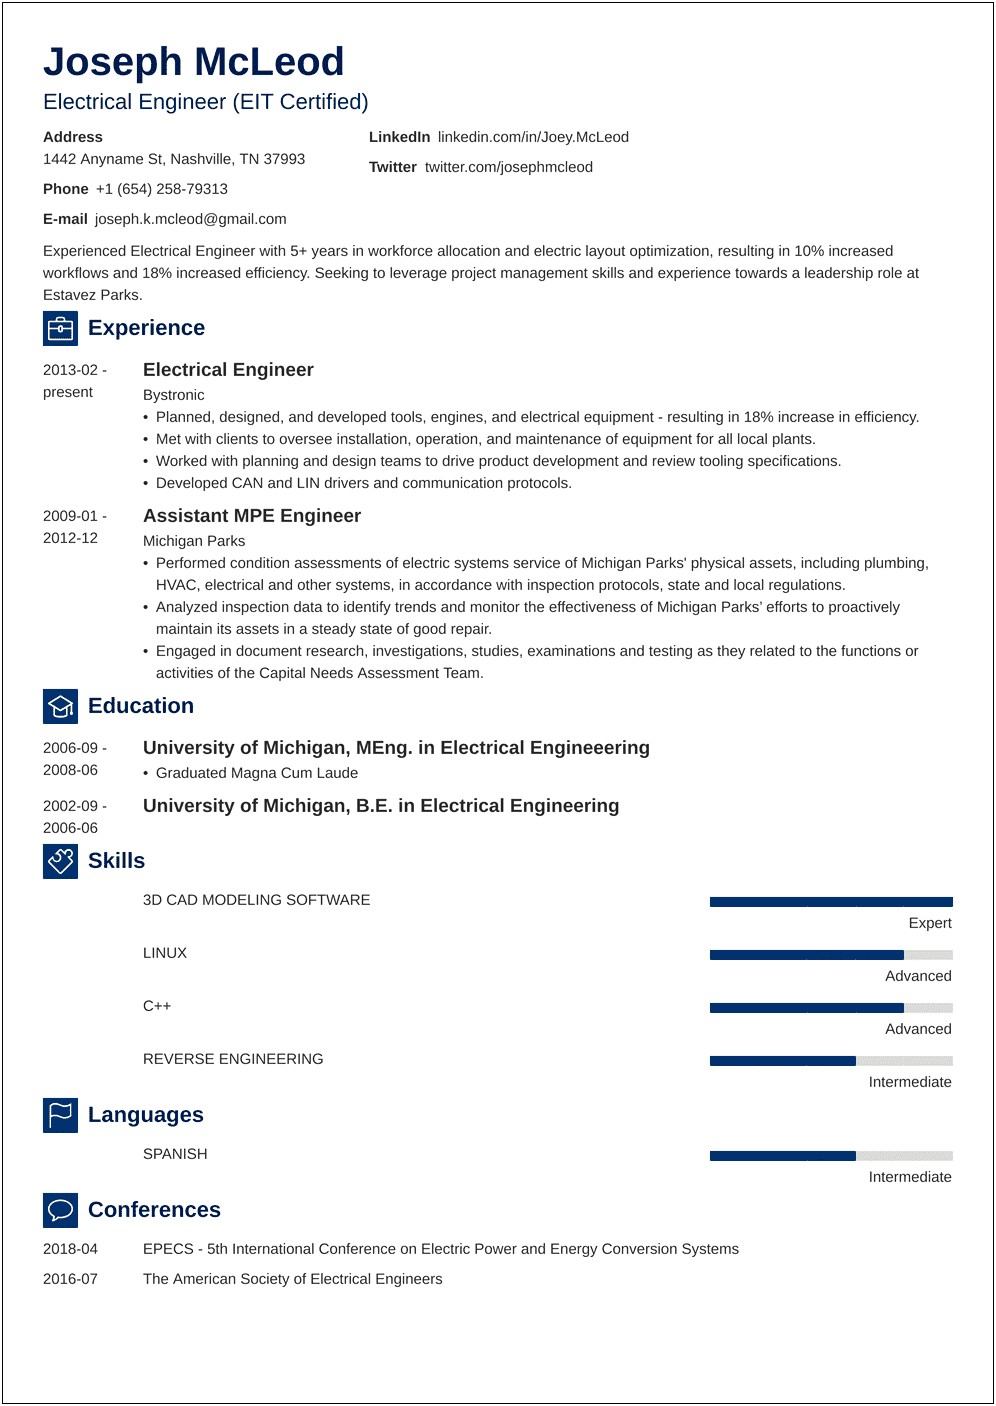 Career Objective For Electronics Engineer Resume